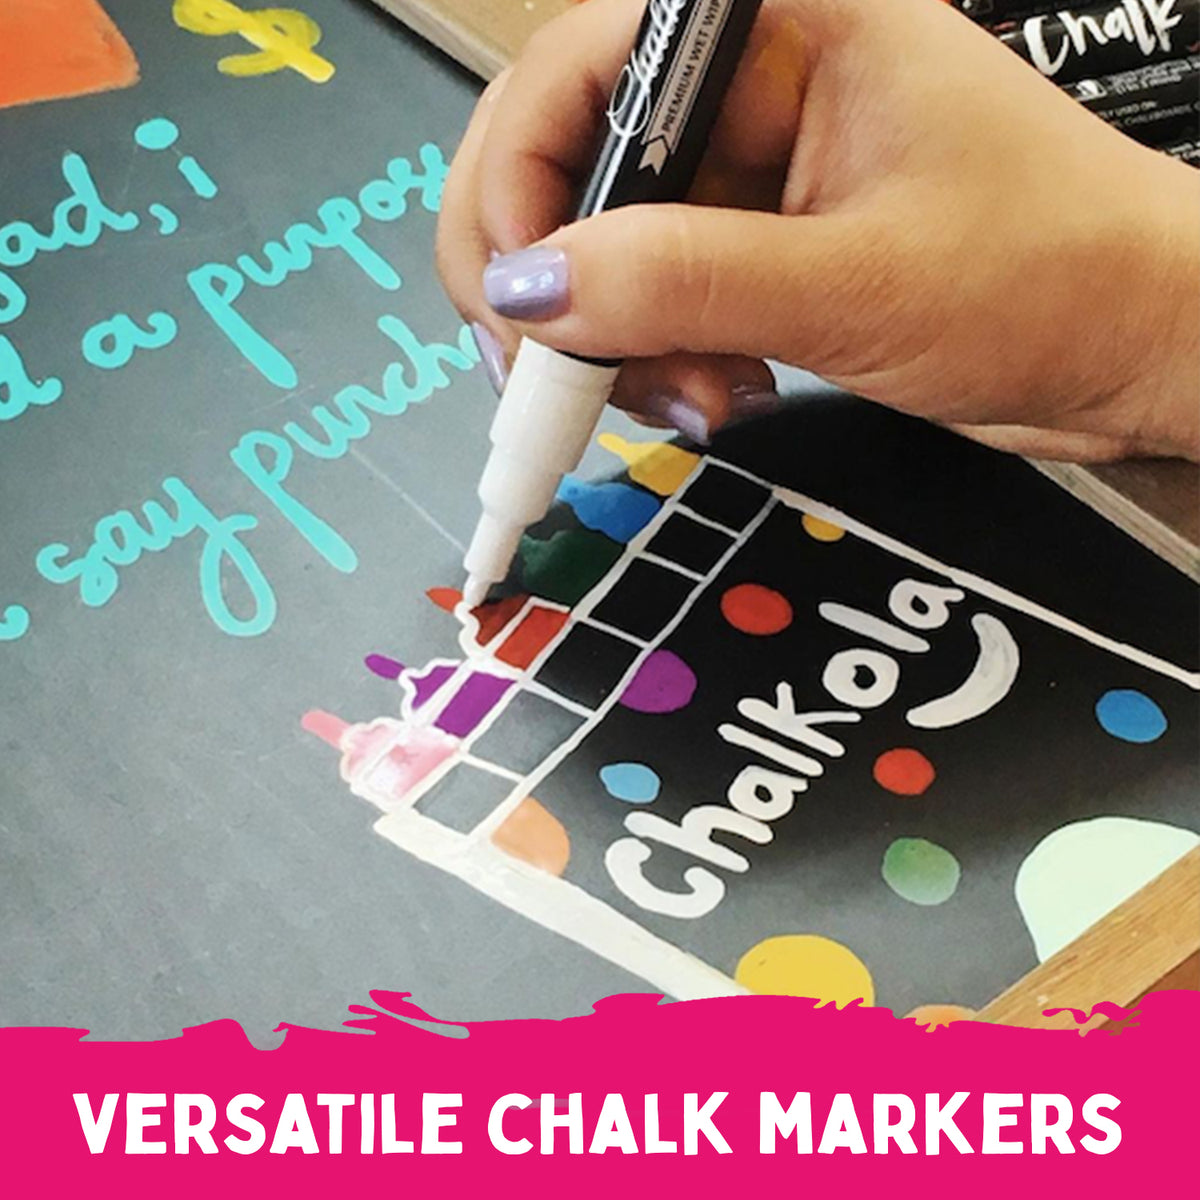 White Chalk Markers - Pack of 4 Pens